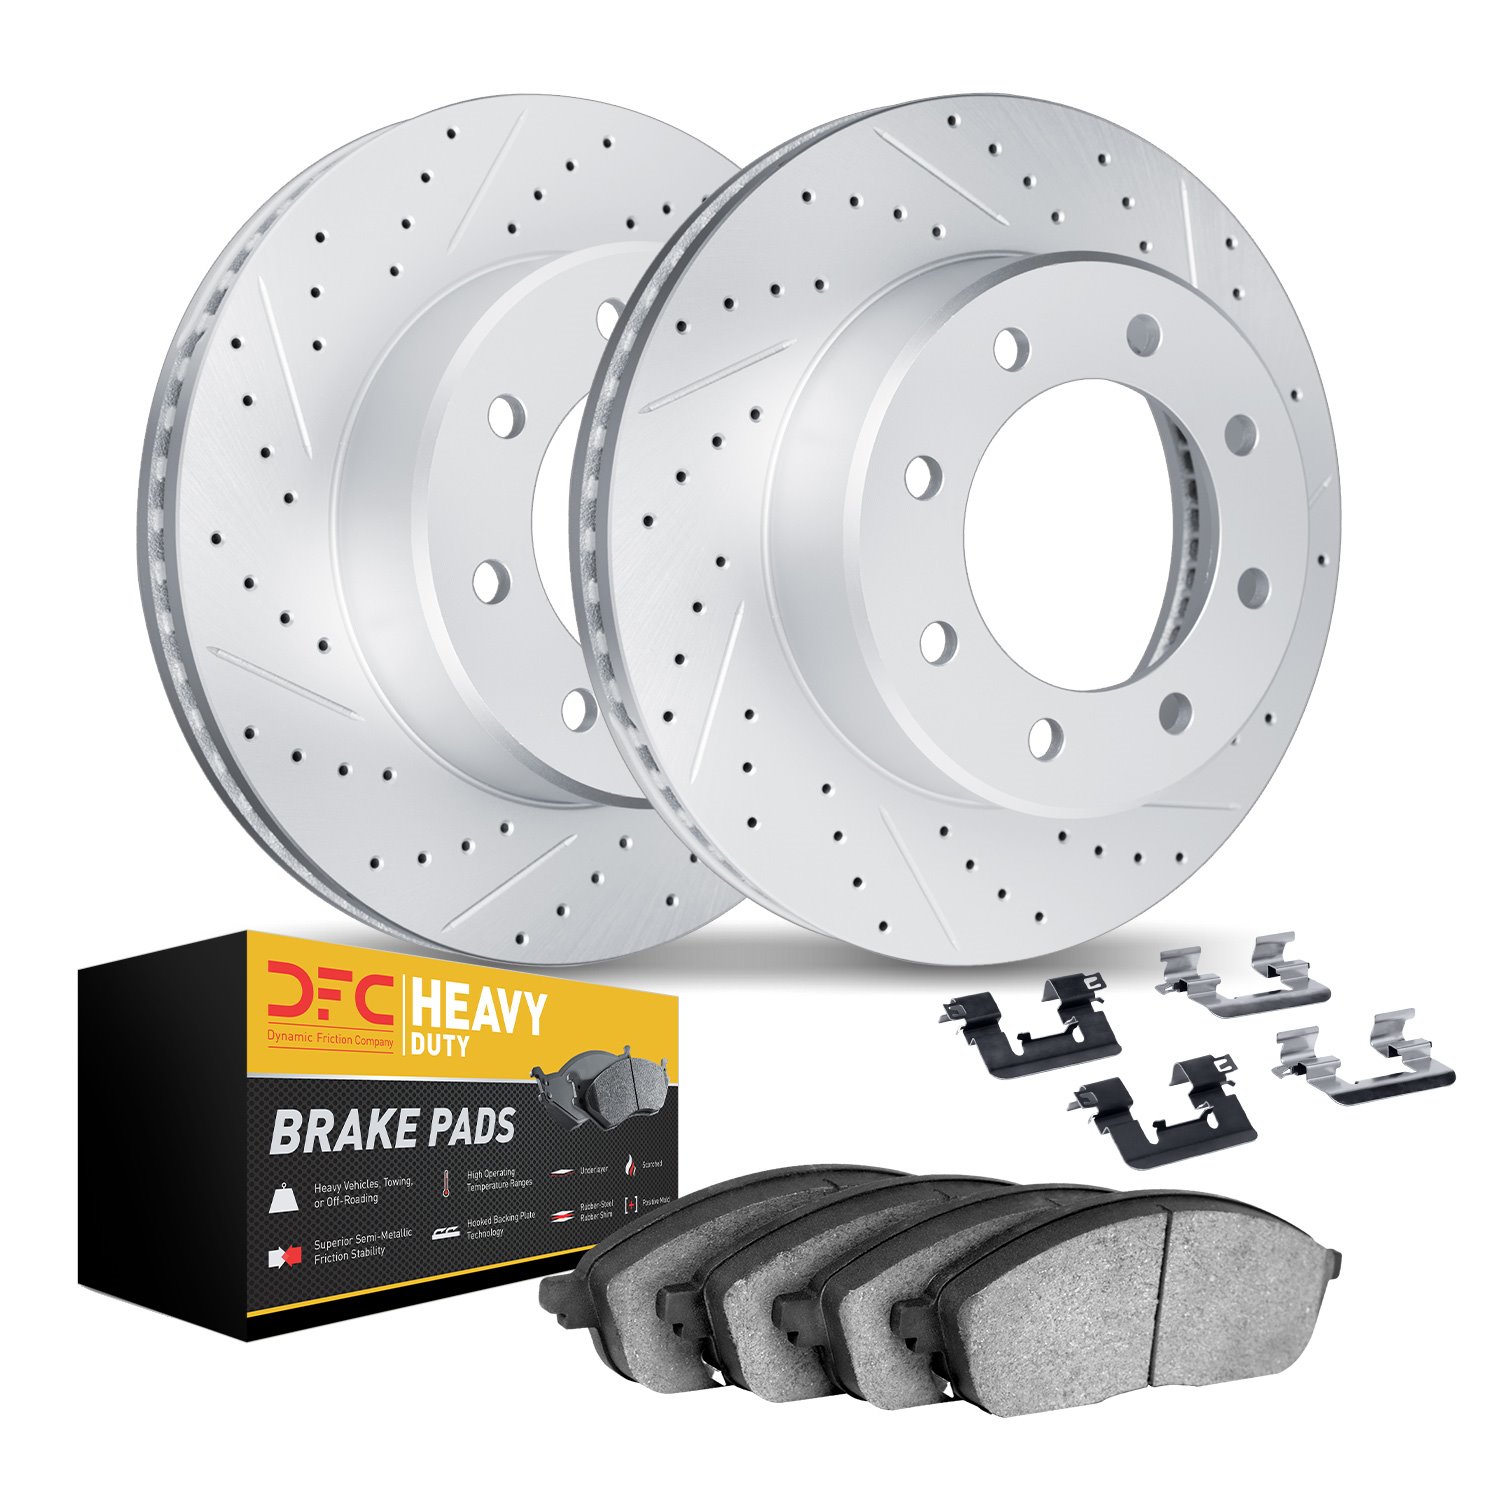 2212-99072 Geoperformance Drilled/Slotted Rotors w/Heavy-Duty Pads Kit & Hardware, 1980-1994 Ford/Lincoln/Mercury/Mazda, Positio